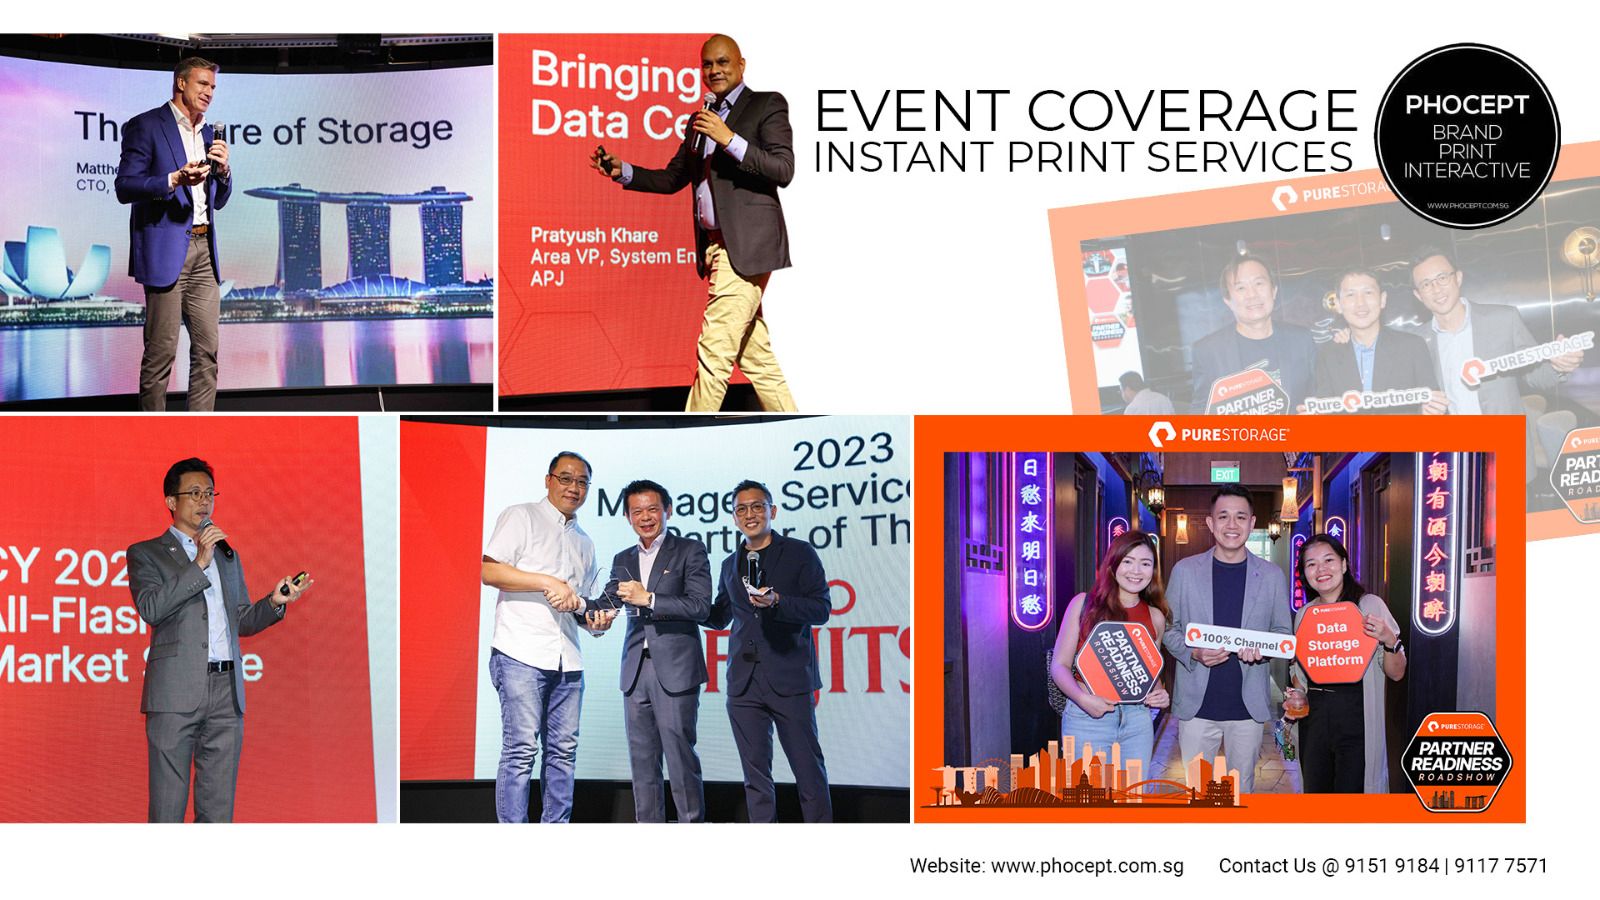 Phocept Event Photography and Instant Print in Singapore